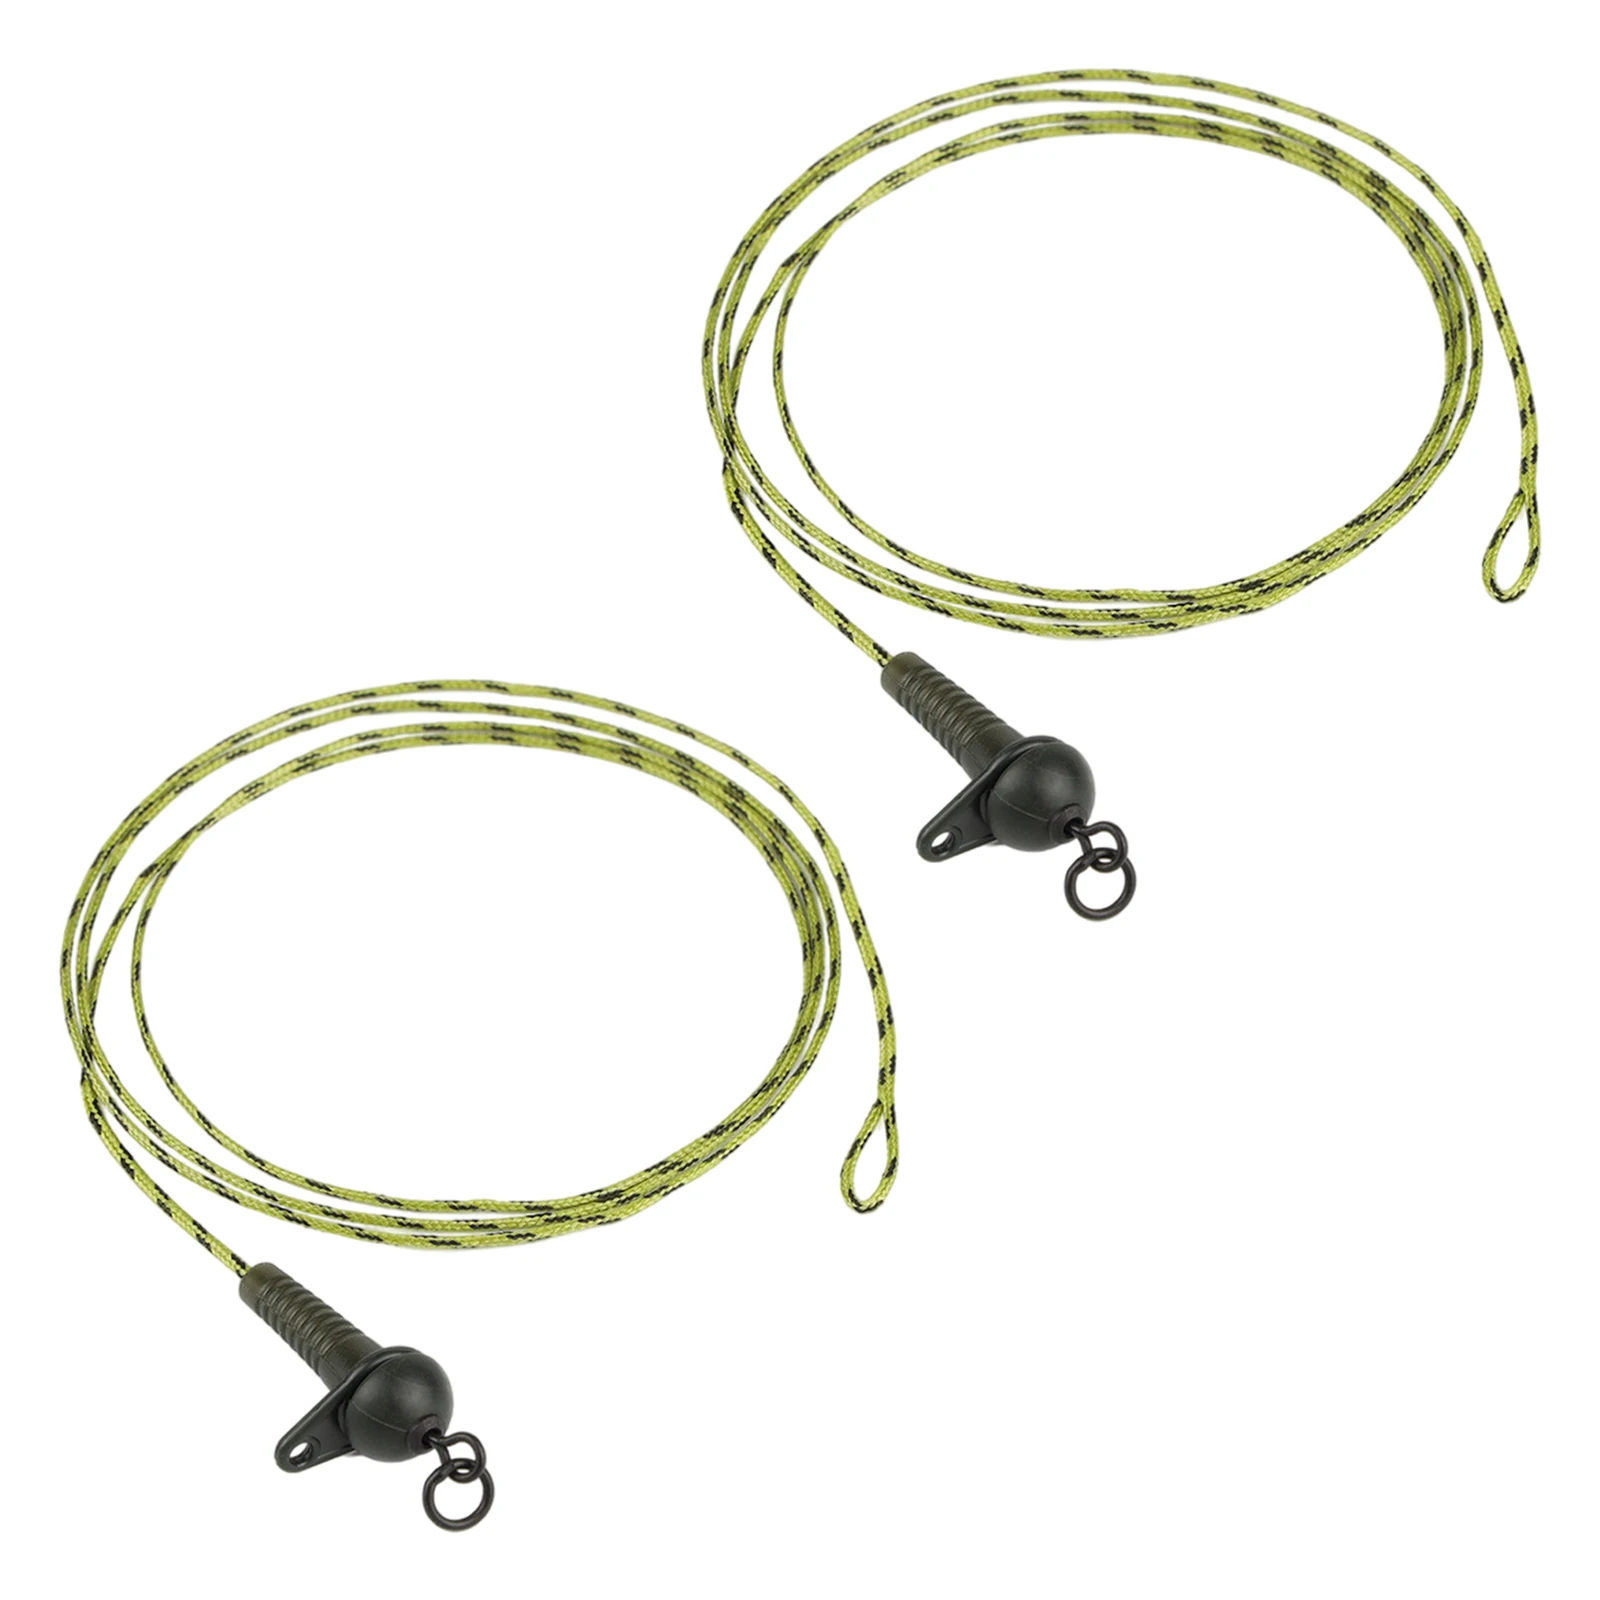 Carp Fishing Leaders Line High Strength Fishing Lead Core Line with Swivel for Rig Making Catfish Pike Fishing Accessories